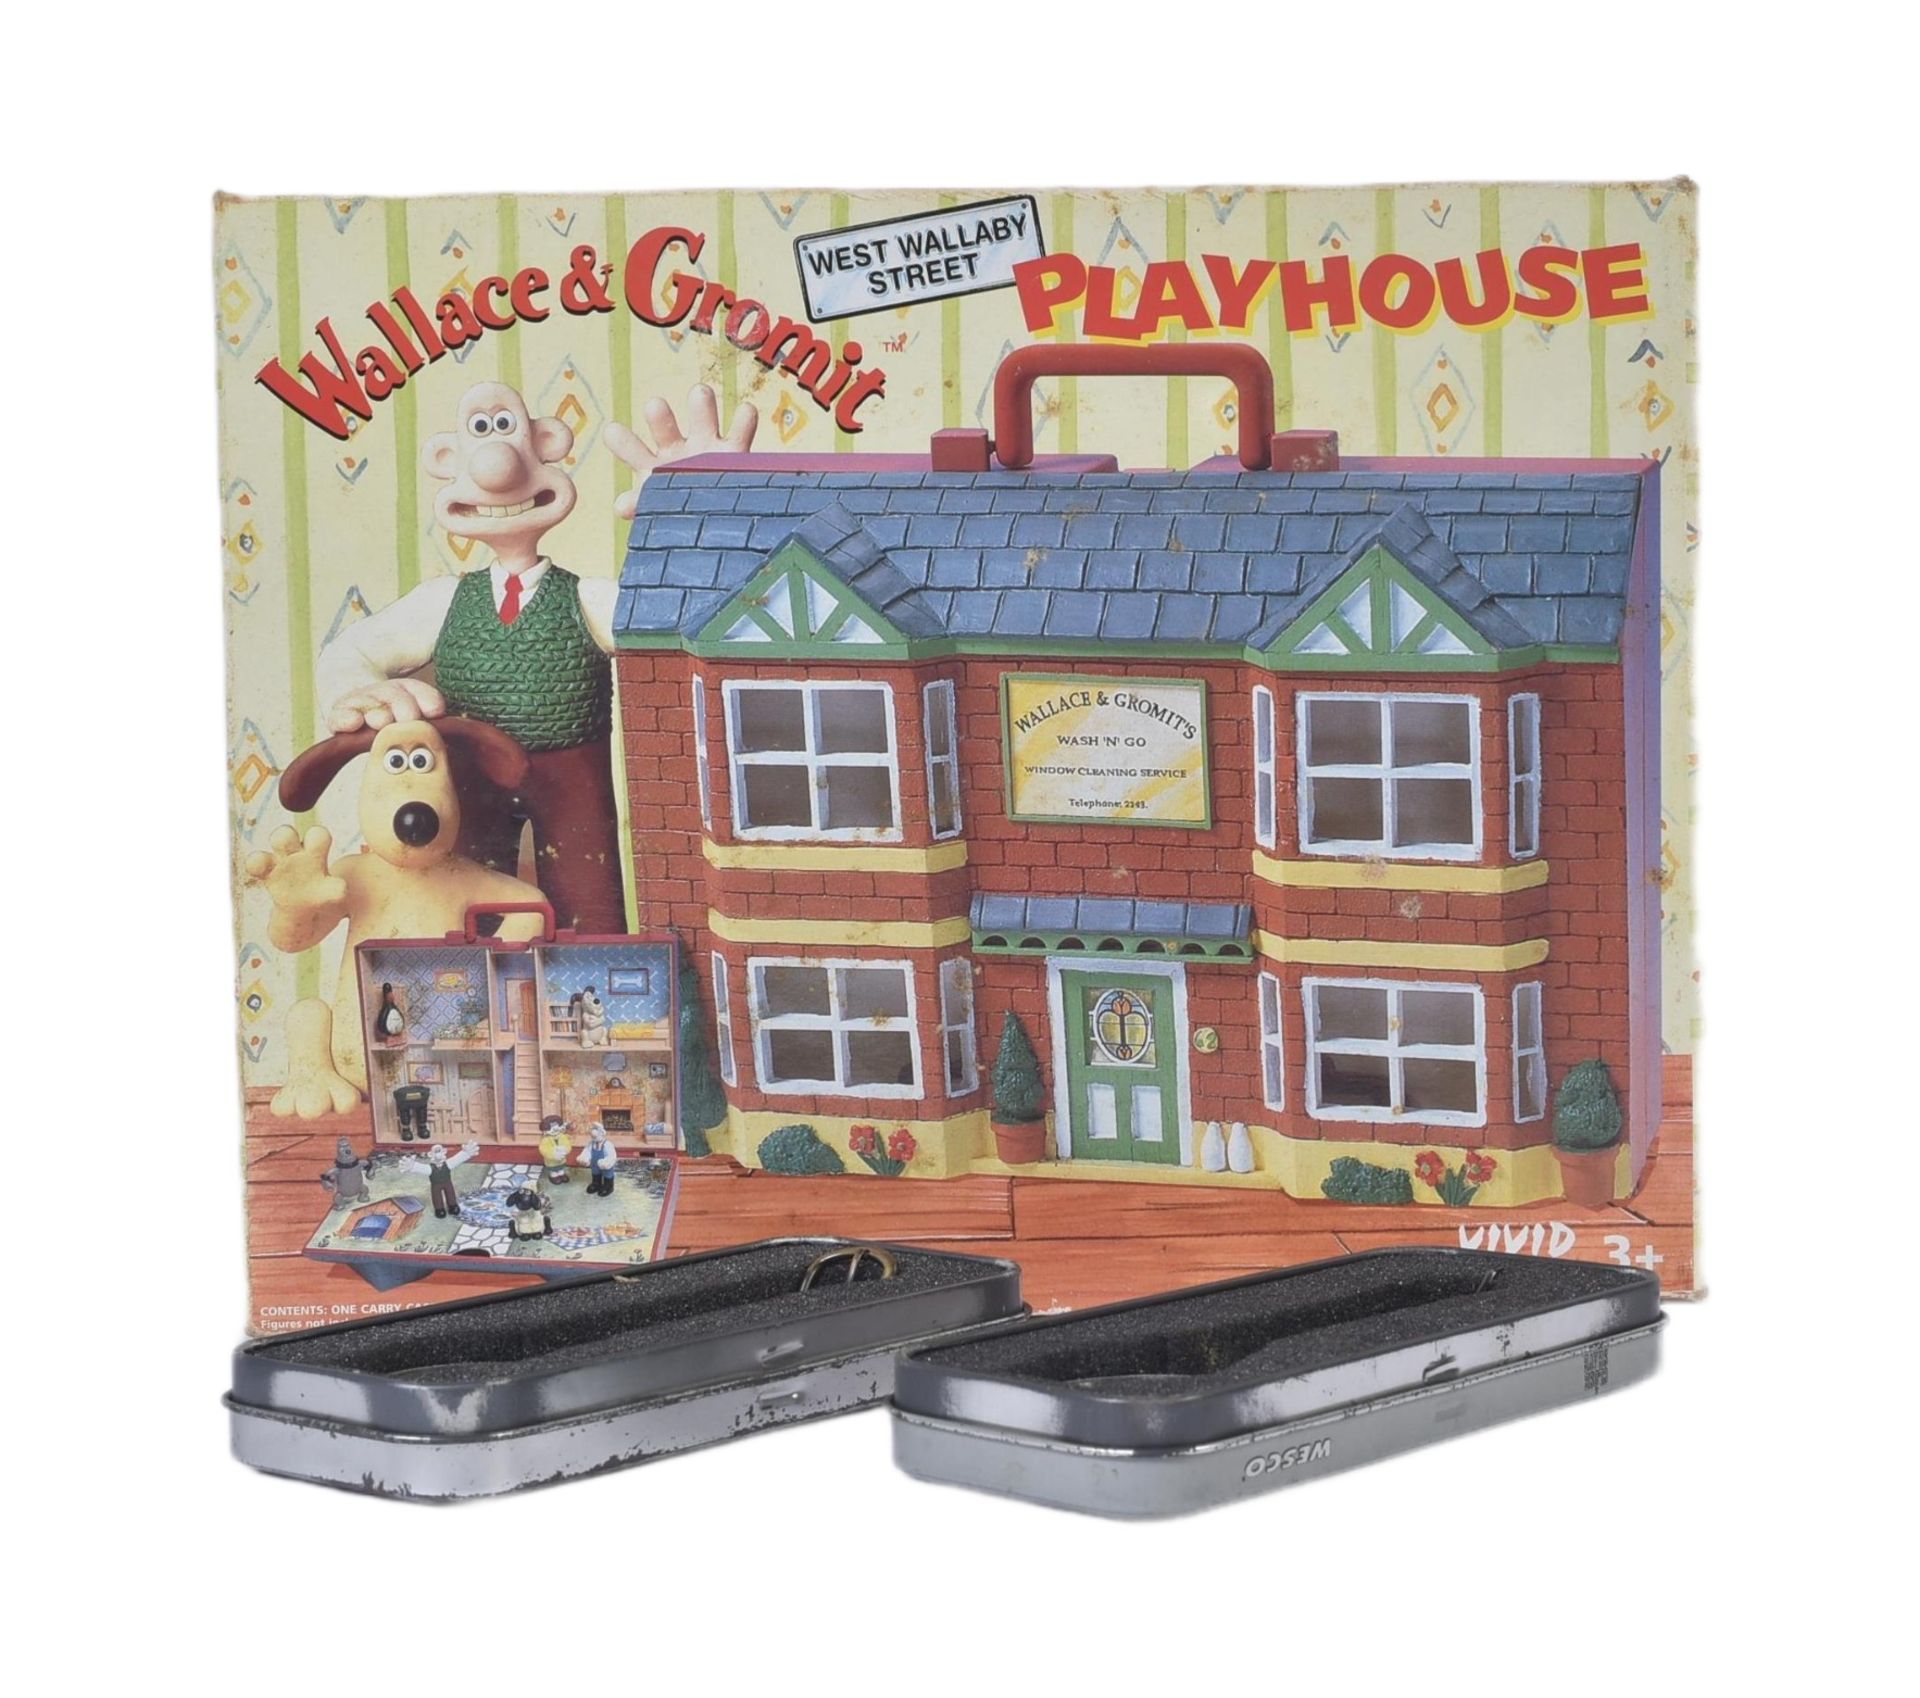 WALLACE & GROMIT - VIVID IMAGINATIONS PLAYHOUSE & WATCHES